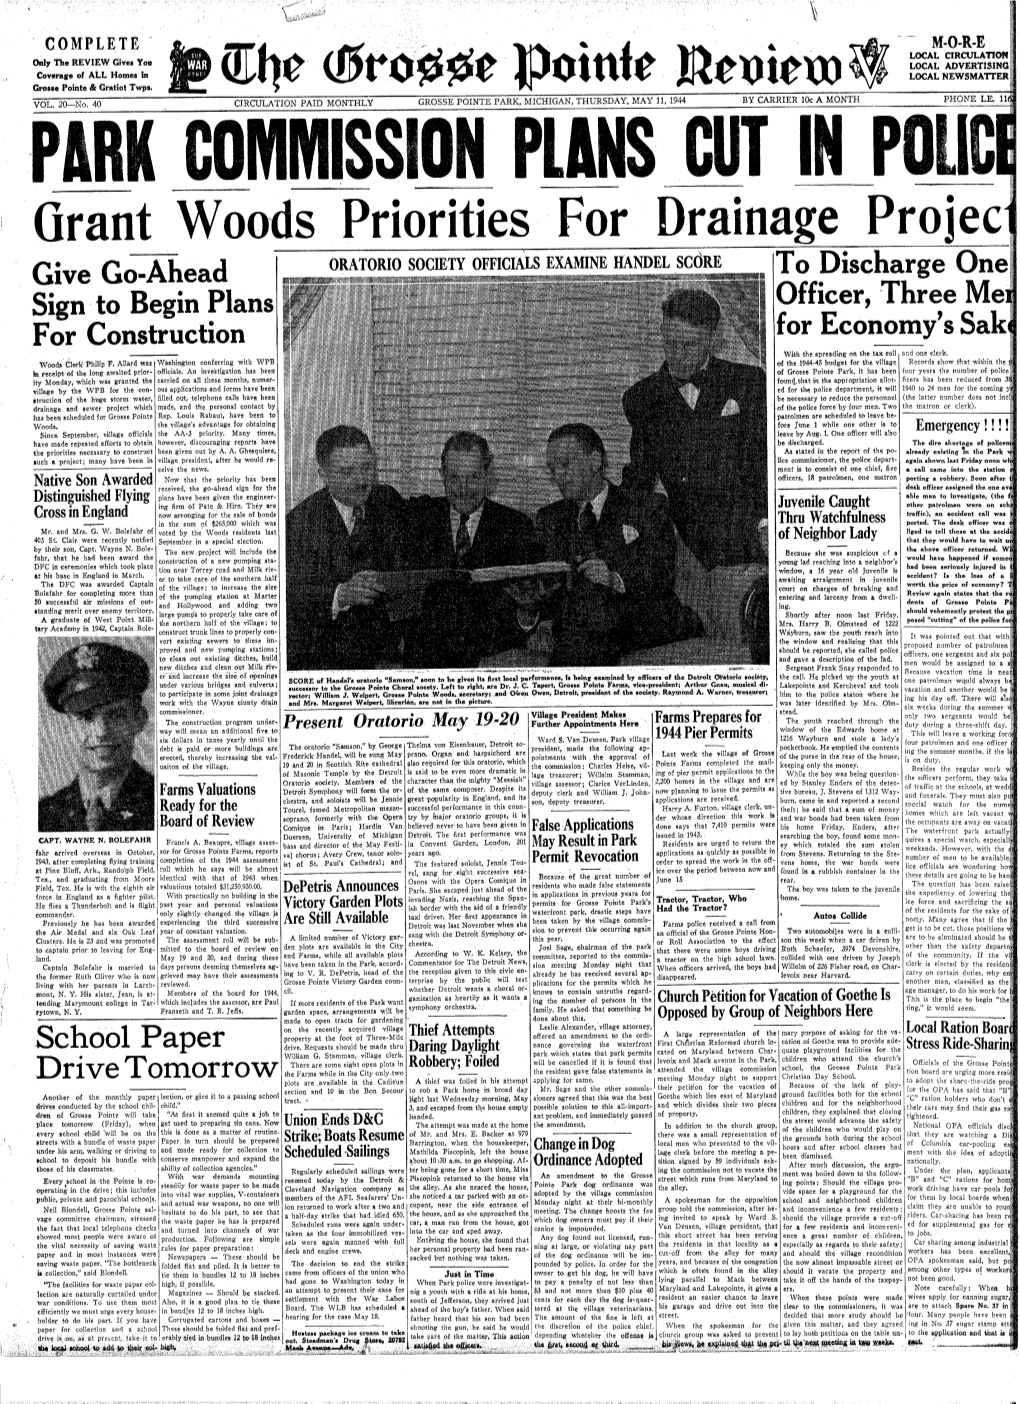 Grant Woods Priorities for Drainage Projec __ ' I Give Go-Ahead ORATORIO SOCIETY OFFICIALS EXAMINE HANDEL SCORE to Discharge Onel